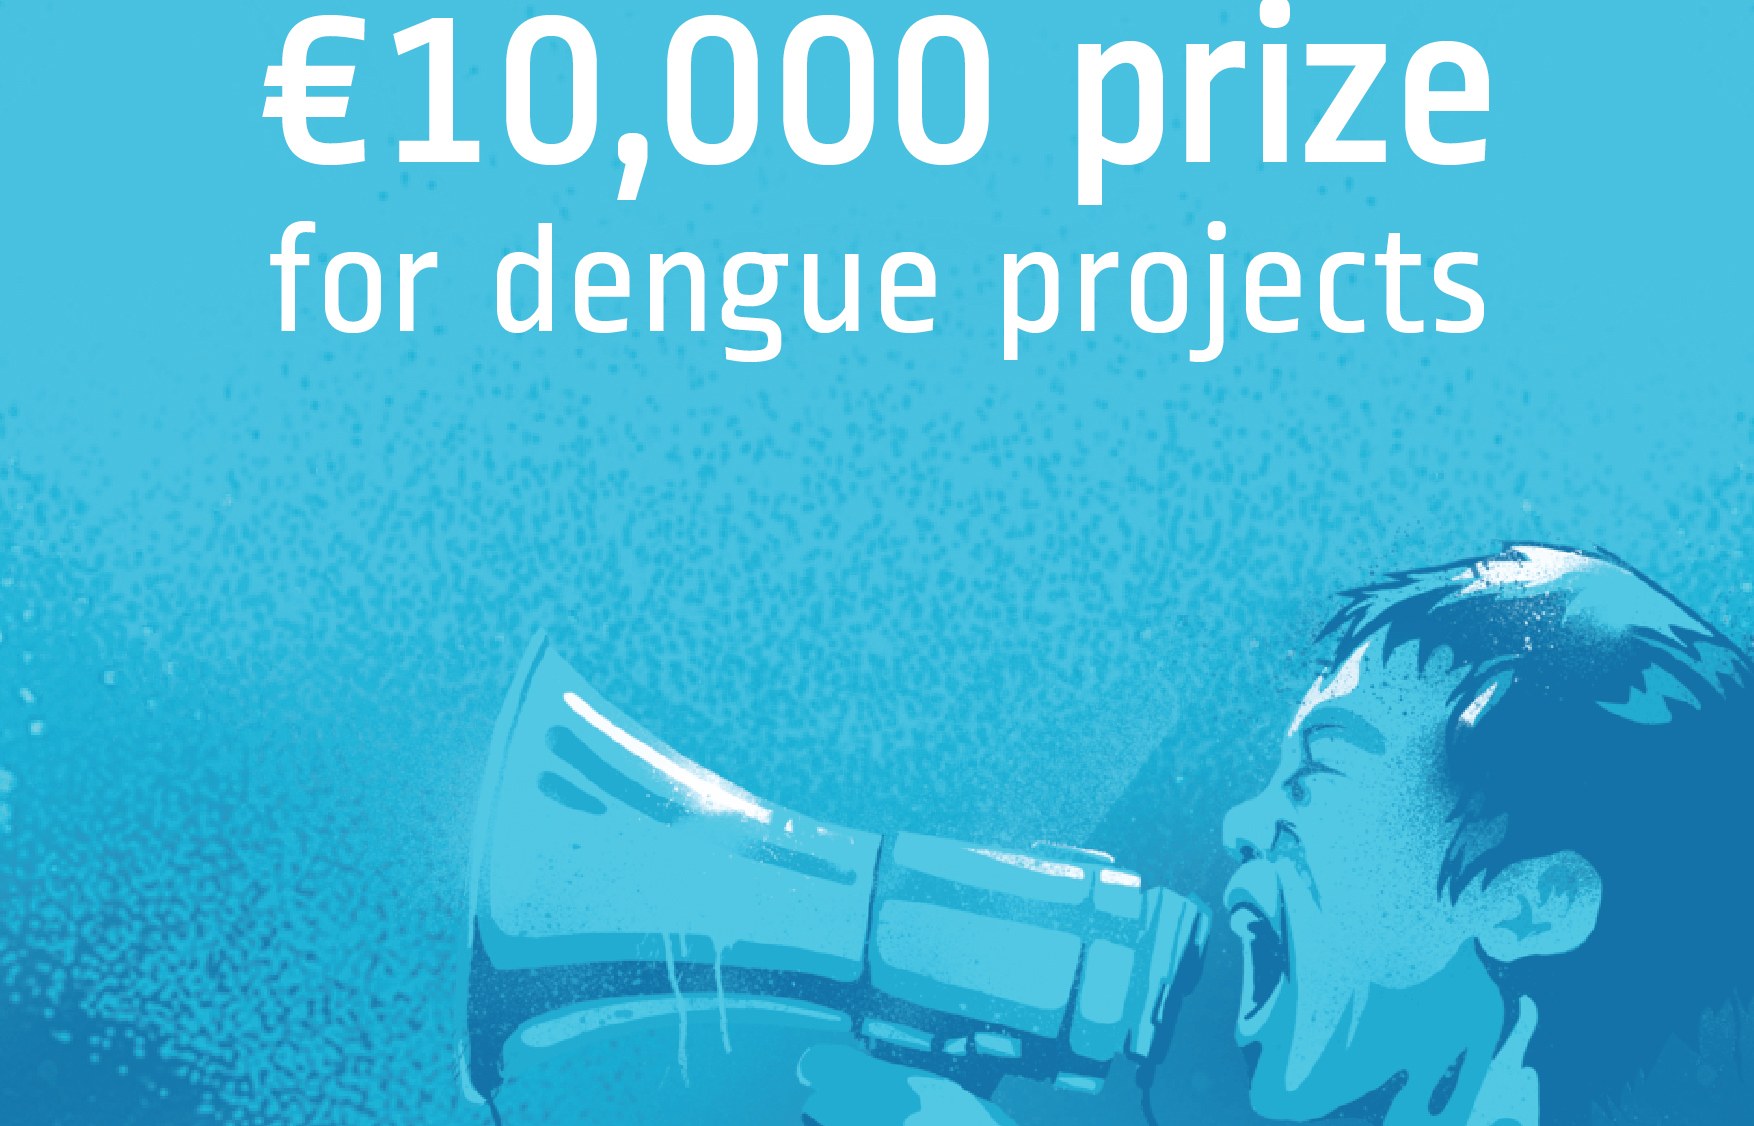 €10,000 prize for dengue projects